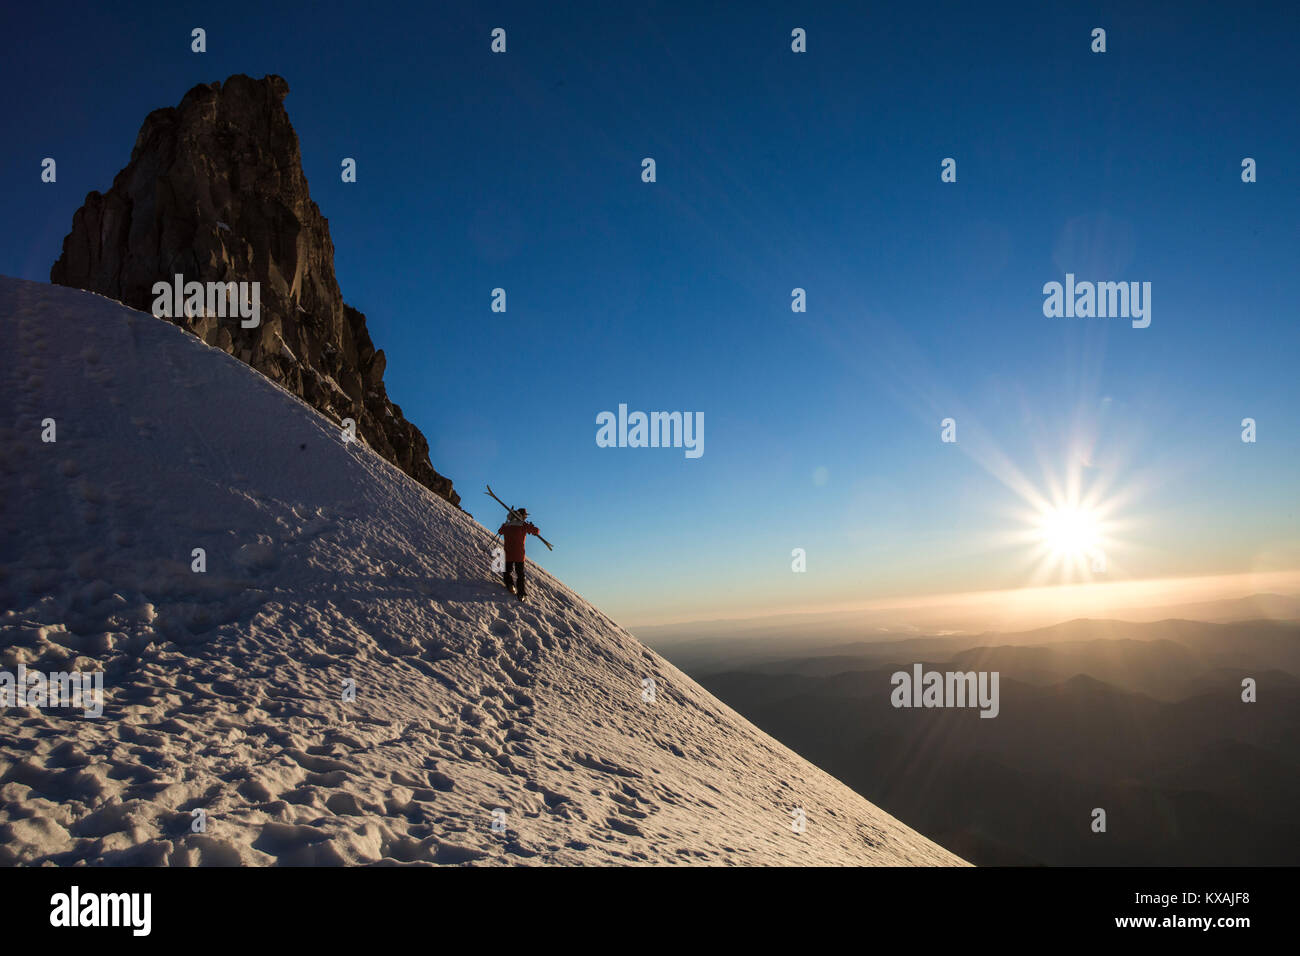 Skier carrying skis on snowy mountain with Sun setting in background, Mount Hood, Oregon, USA Stock Photo